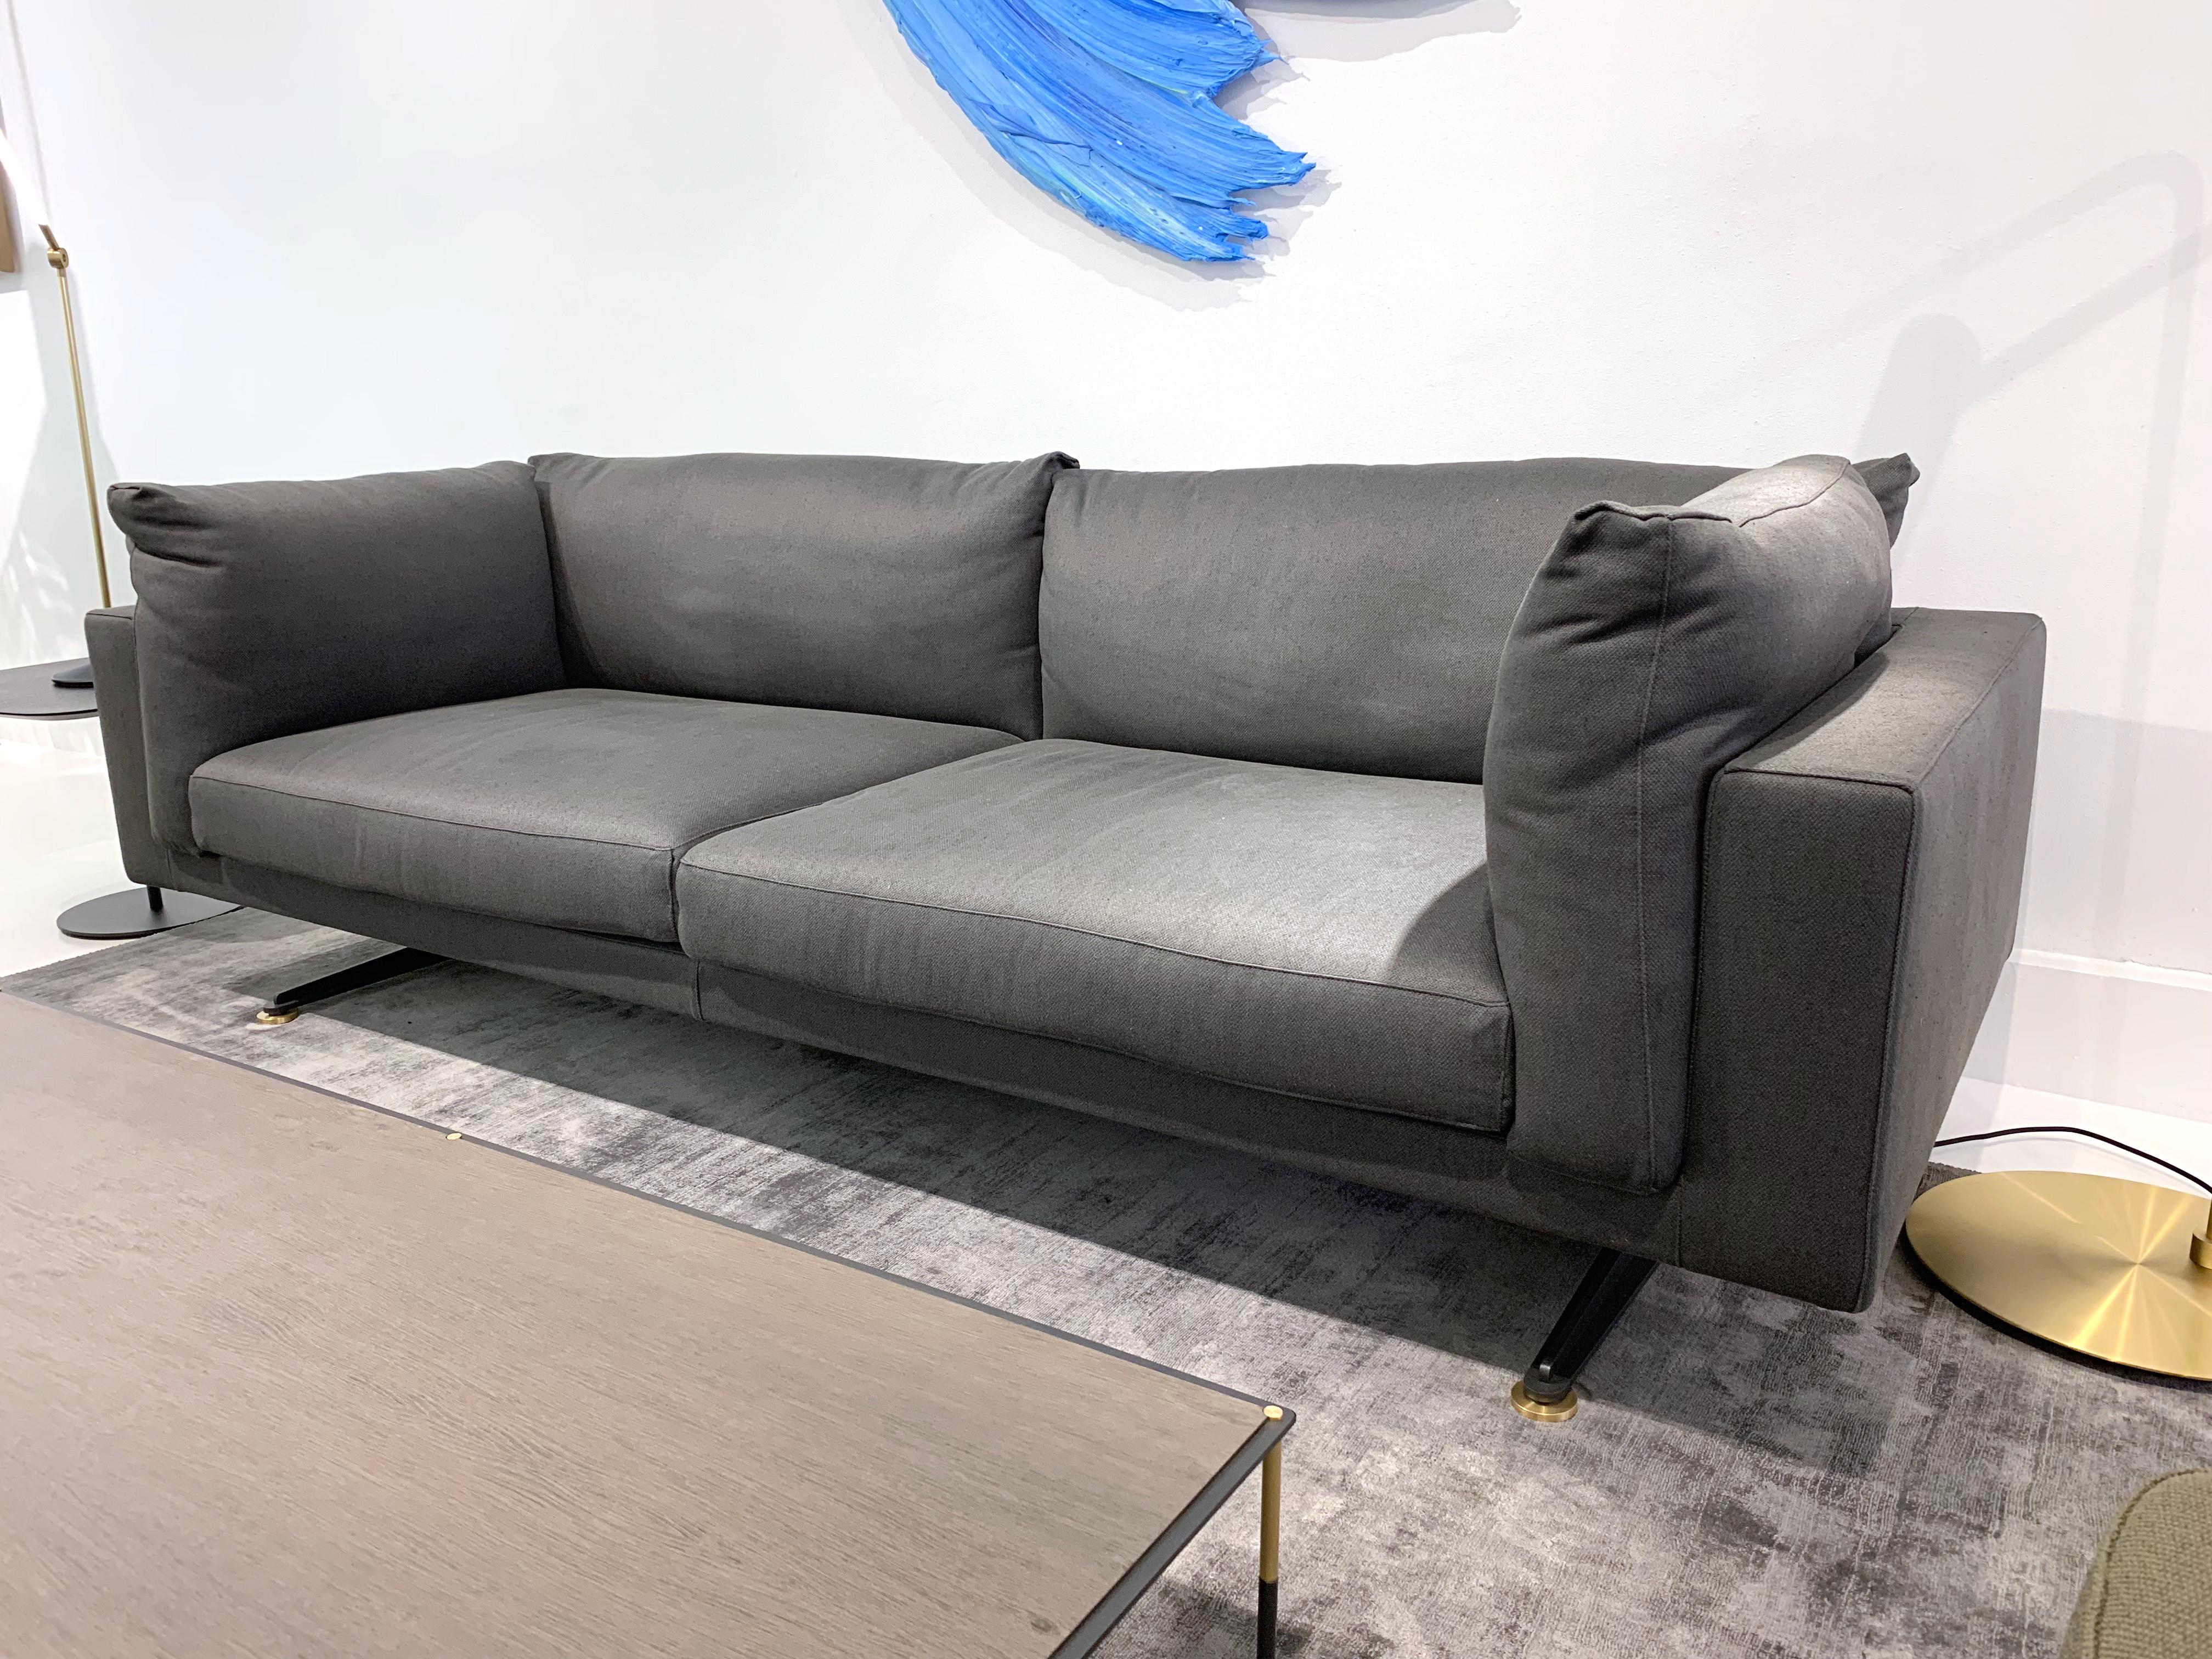 Floyd-Hi sofa shown in gray fabric upholstery. Sleek and chic and an excellent seating addition that complements any modern style. Designed by Piero Lissoni.

Dimensions: 92.9